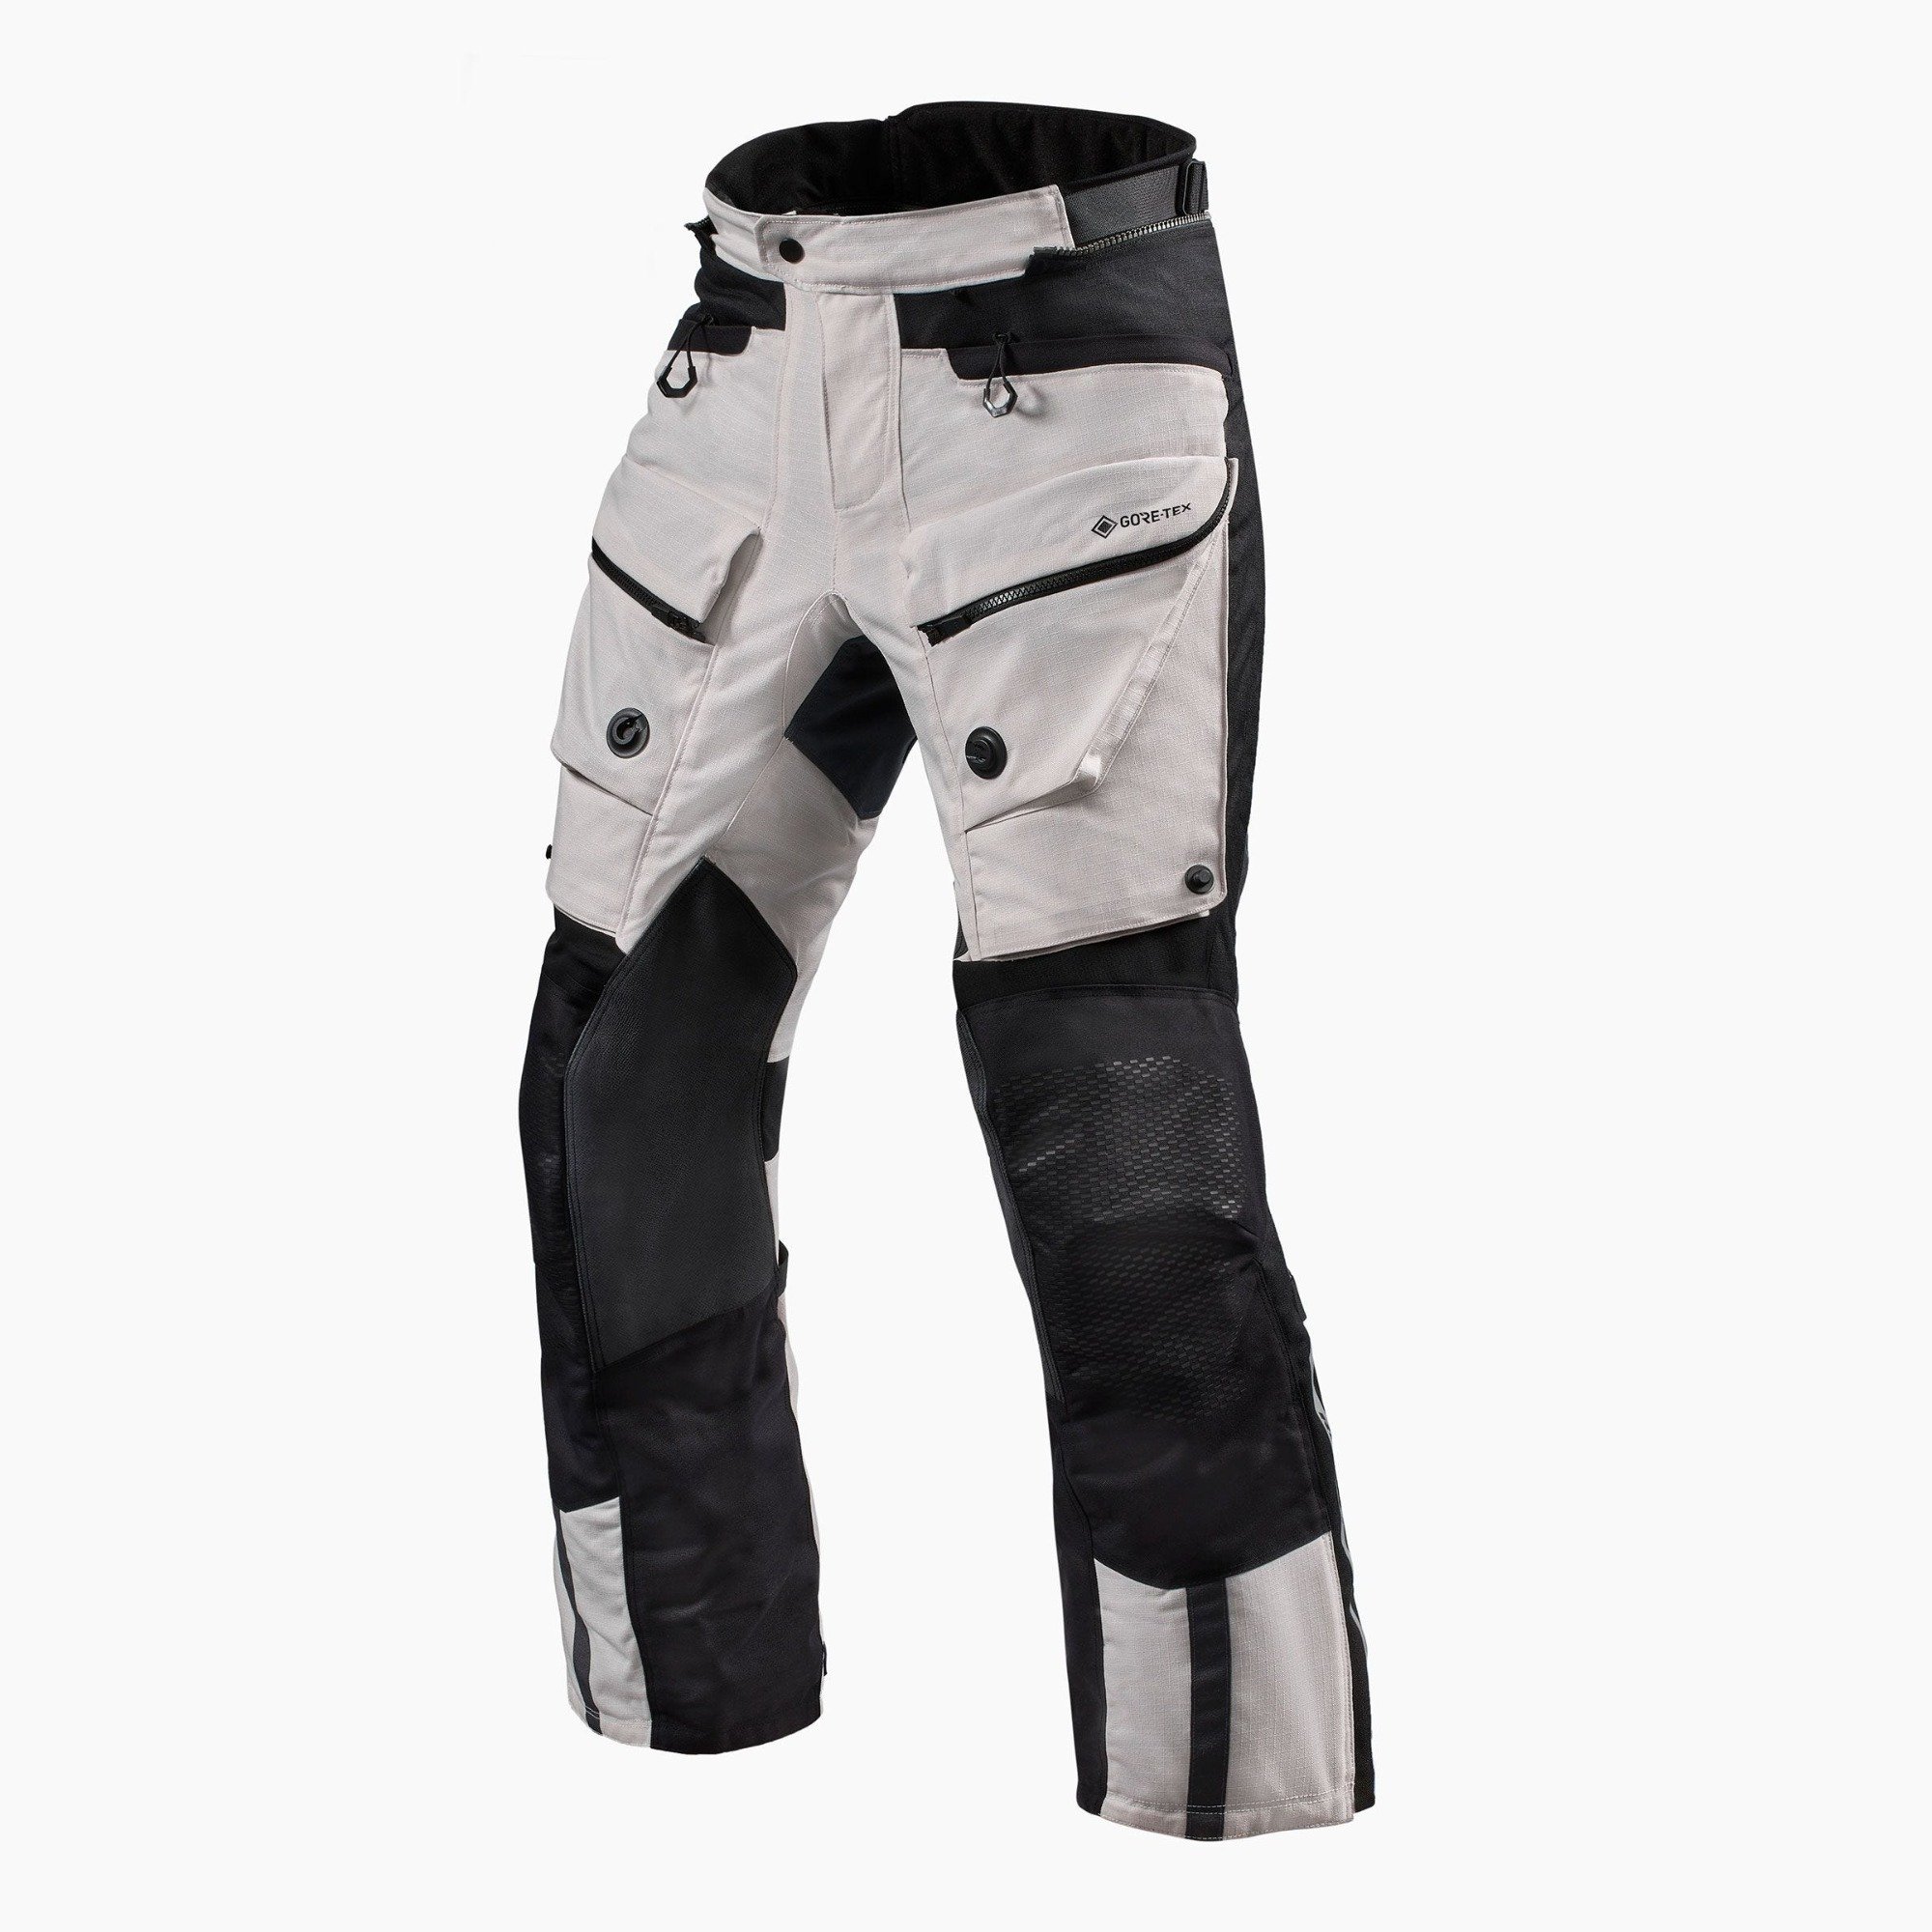 Image of REV'IT! Trousers Defender 3 GTX Silver Black Standard Motorcycle Pants Size M ID 8700001319942